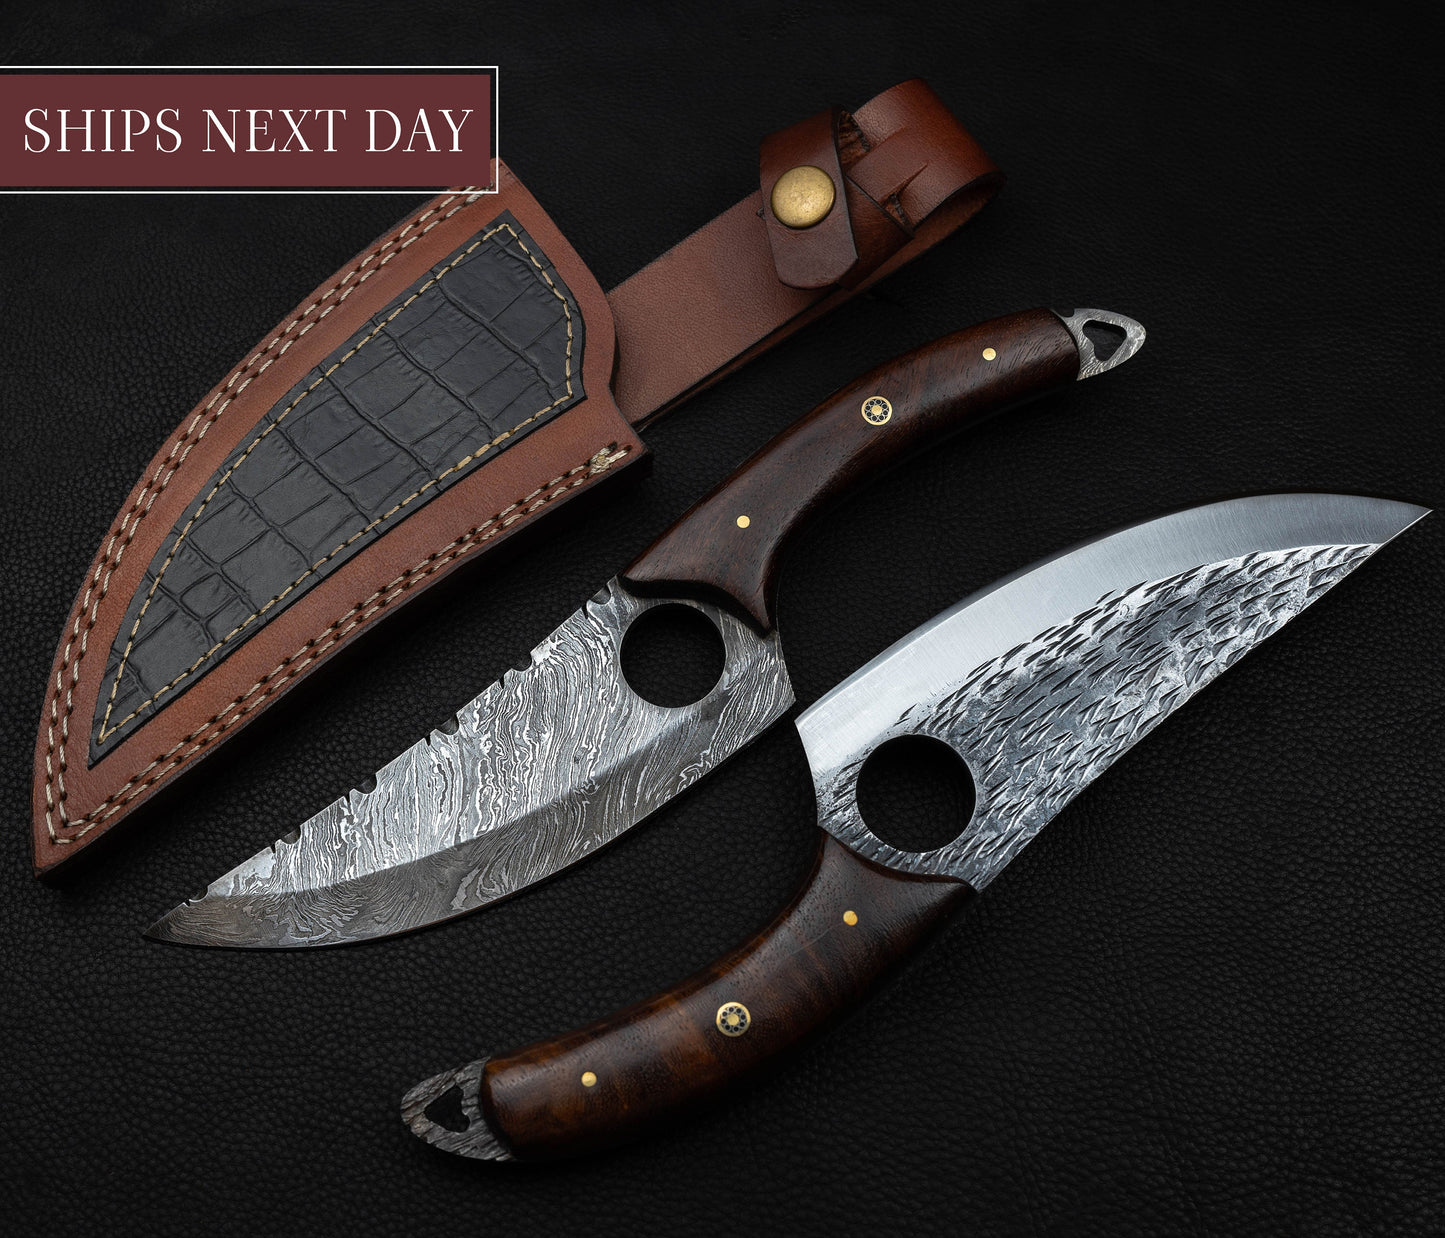 Handmade Japanese Damascus Chief knife Rose Wood Handle, Hand forged Damascus knife Non slip Walnut, Kitchen Skinner Knife, Gift for Dad